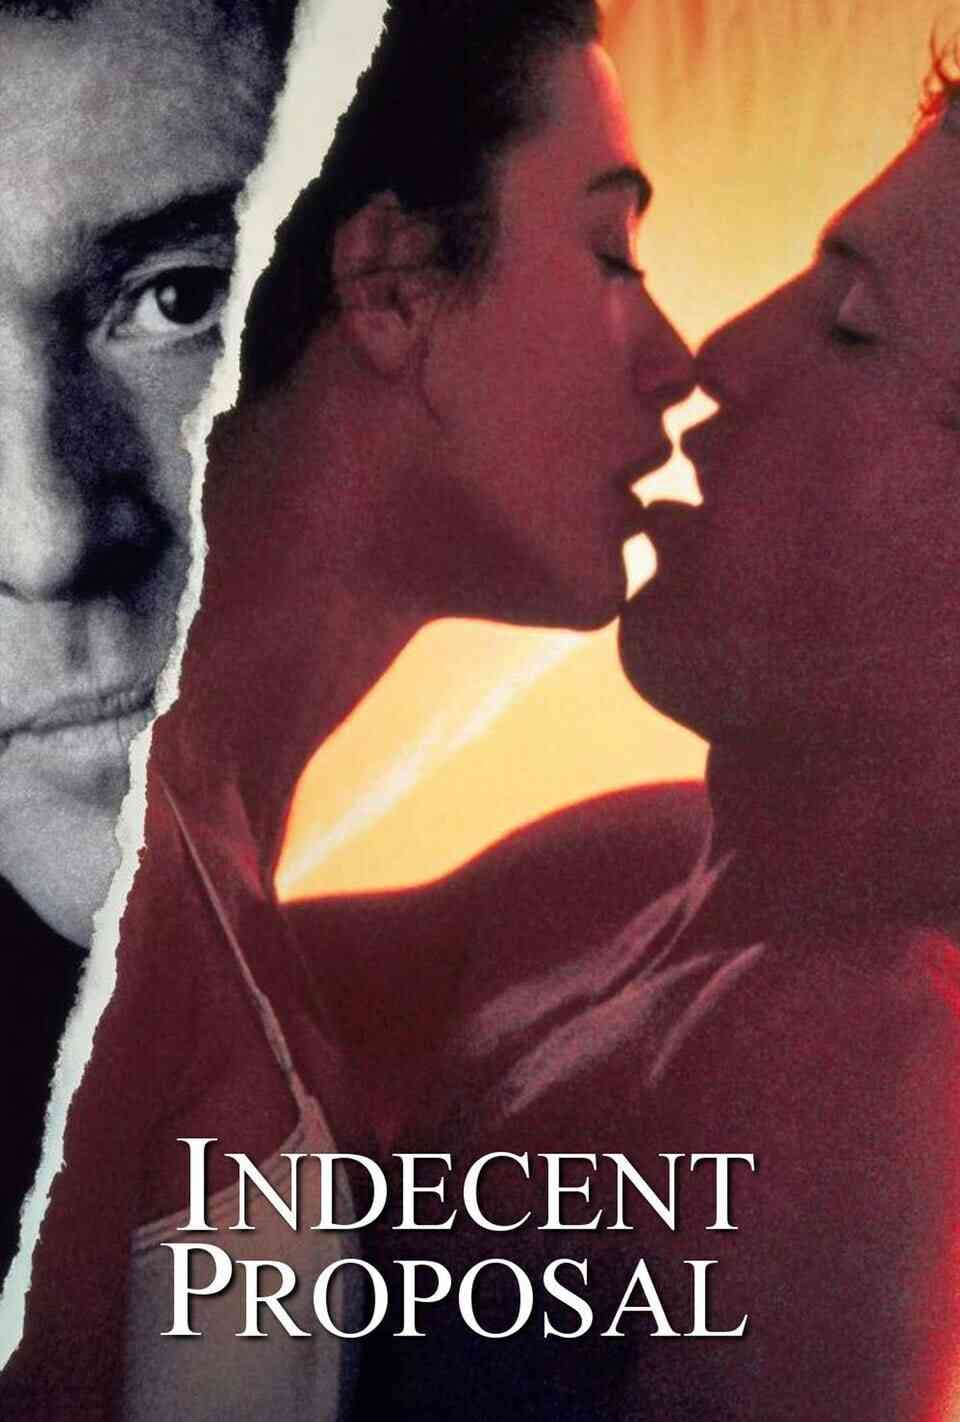 Read Indecent Proposal screenplay (poster)